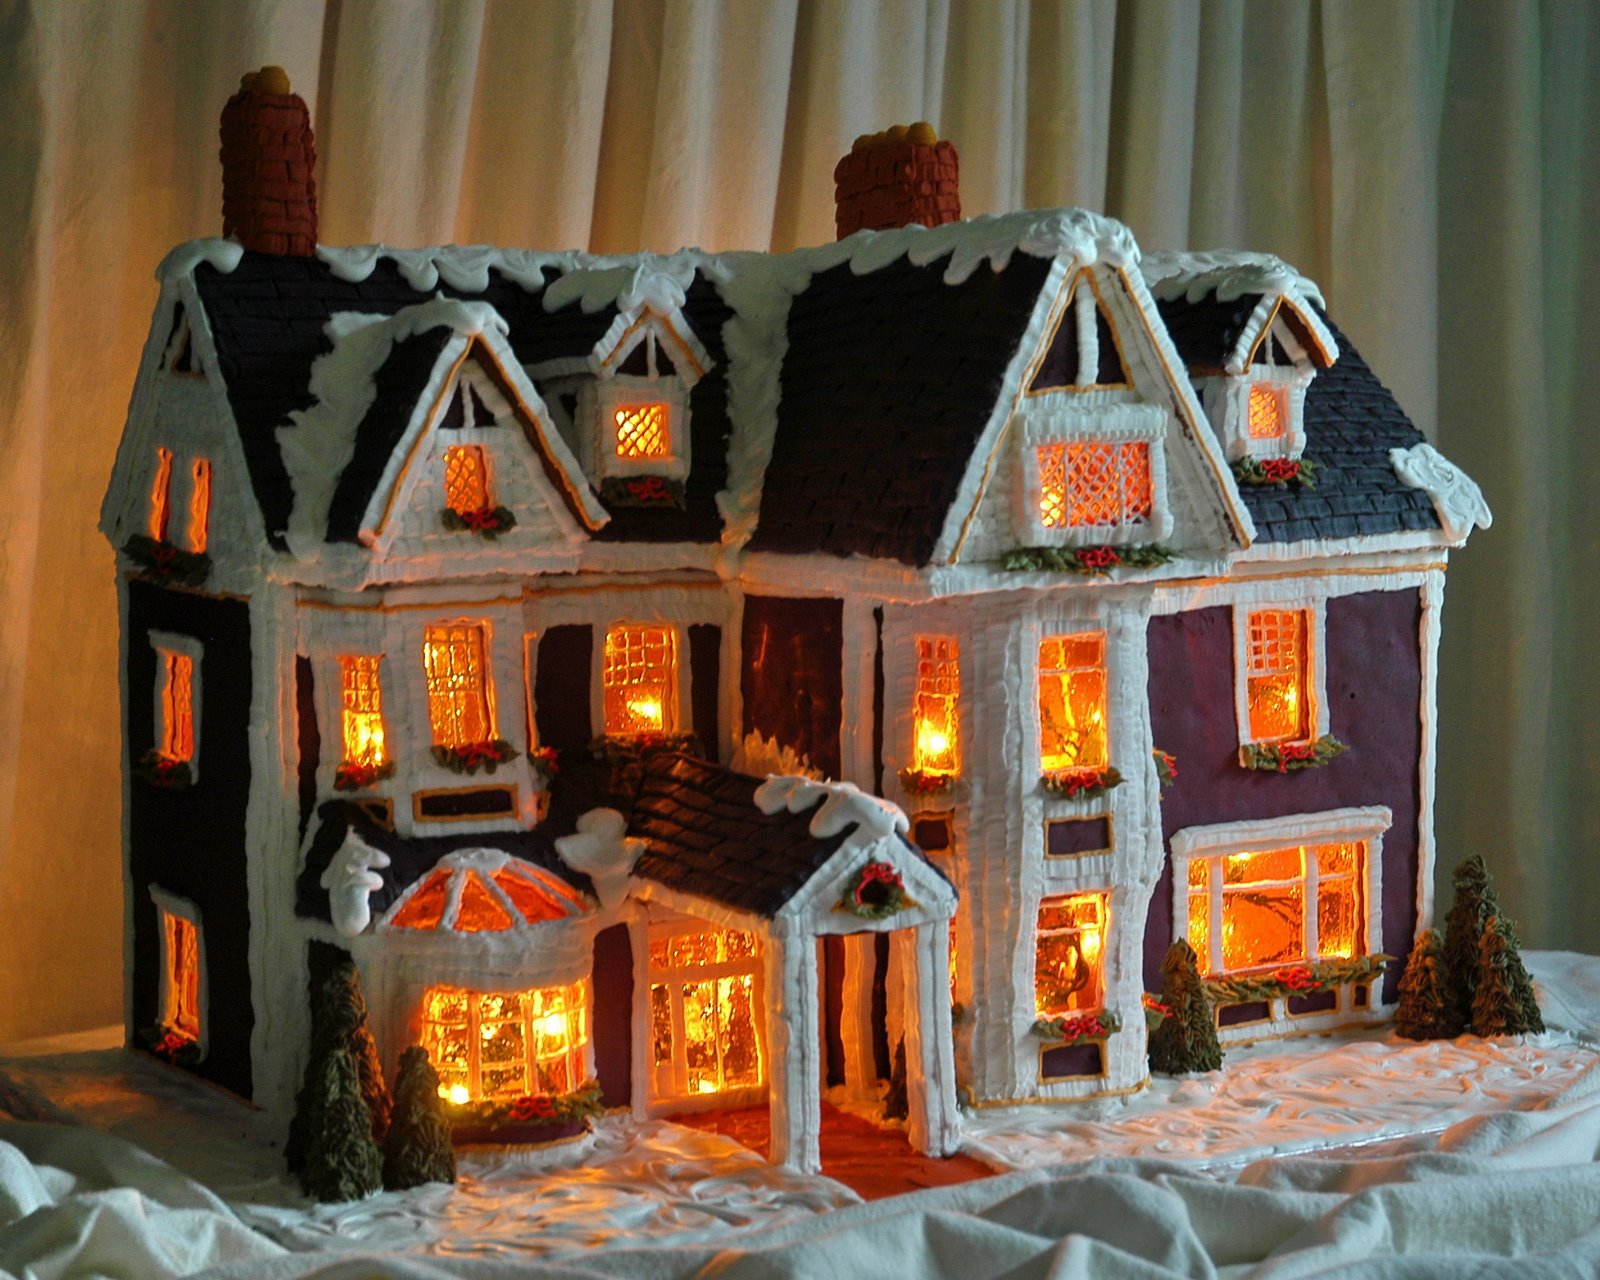 The Coolest Gingerbread Houses in The World! | YouBentMyWookie